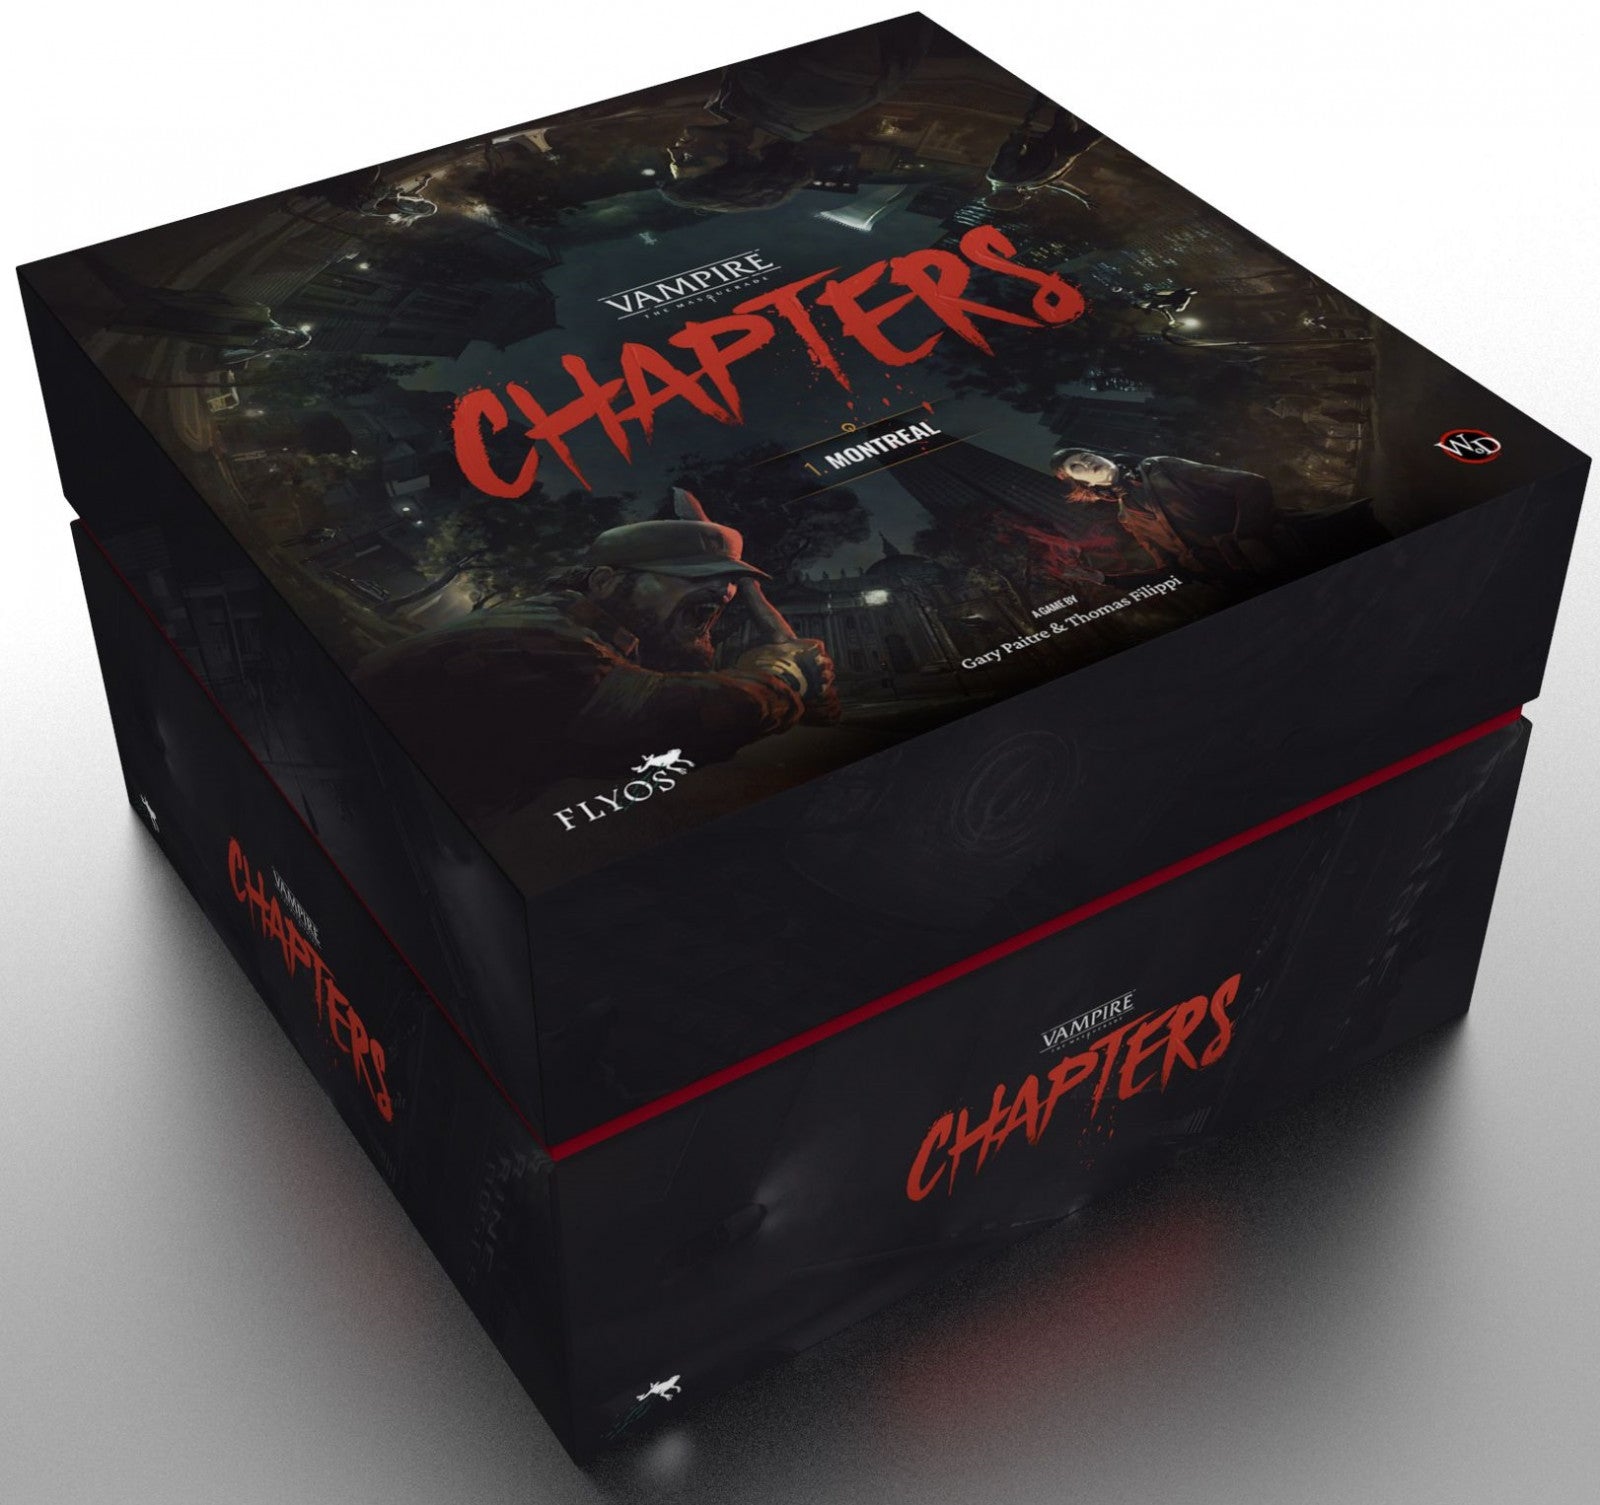 Vampire: the Masquerade - Chapters